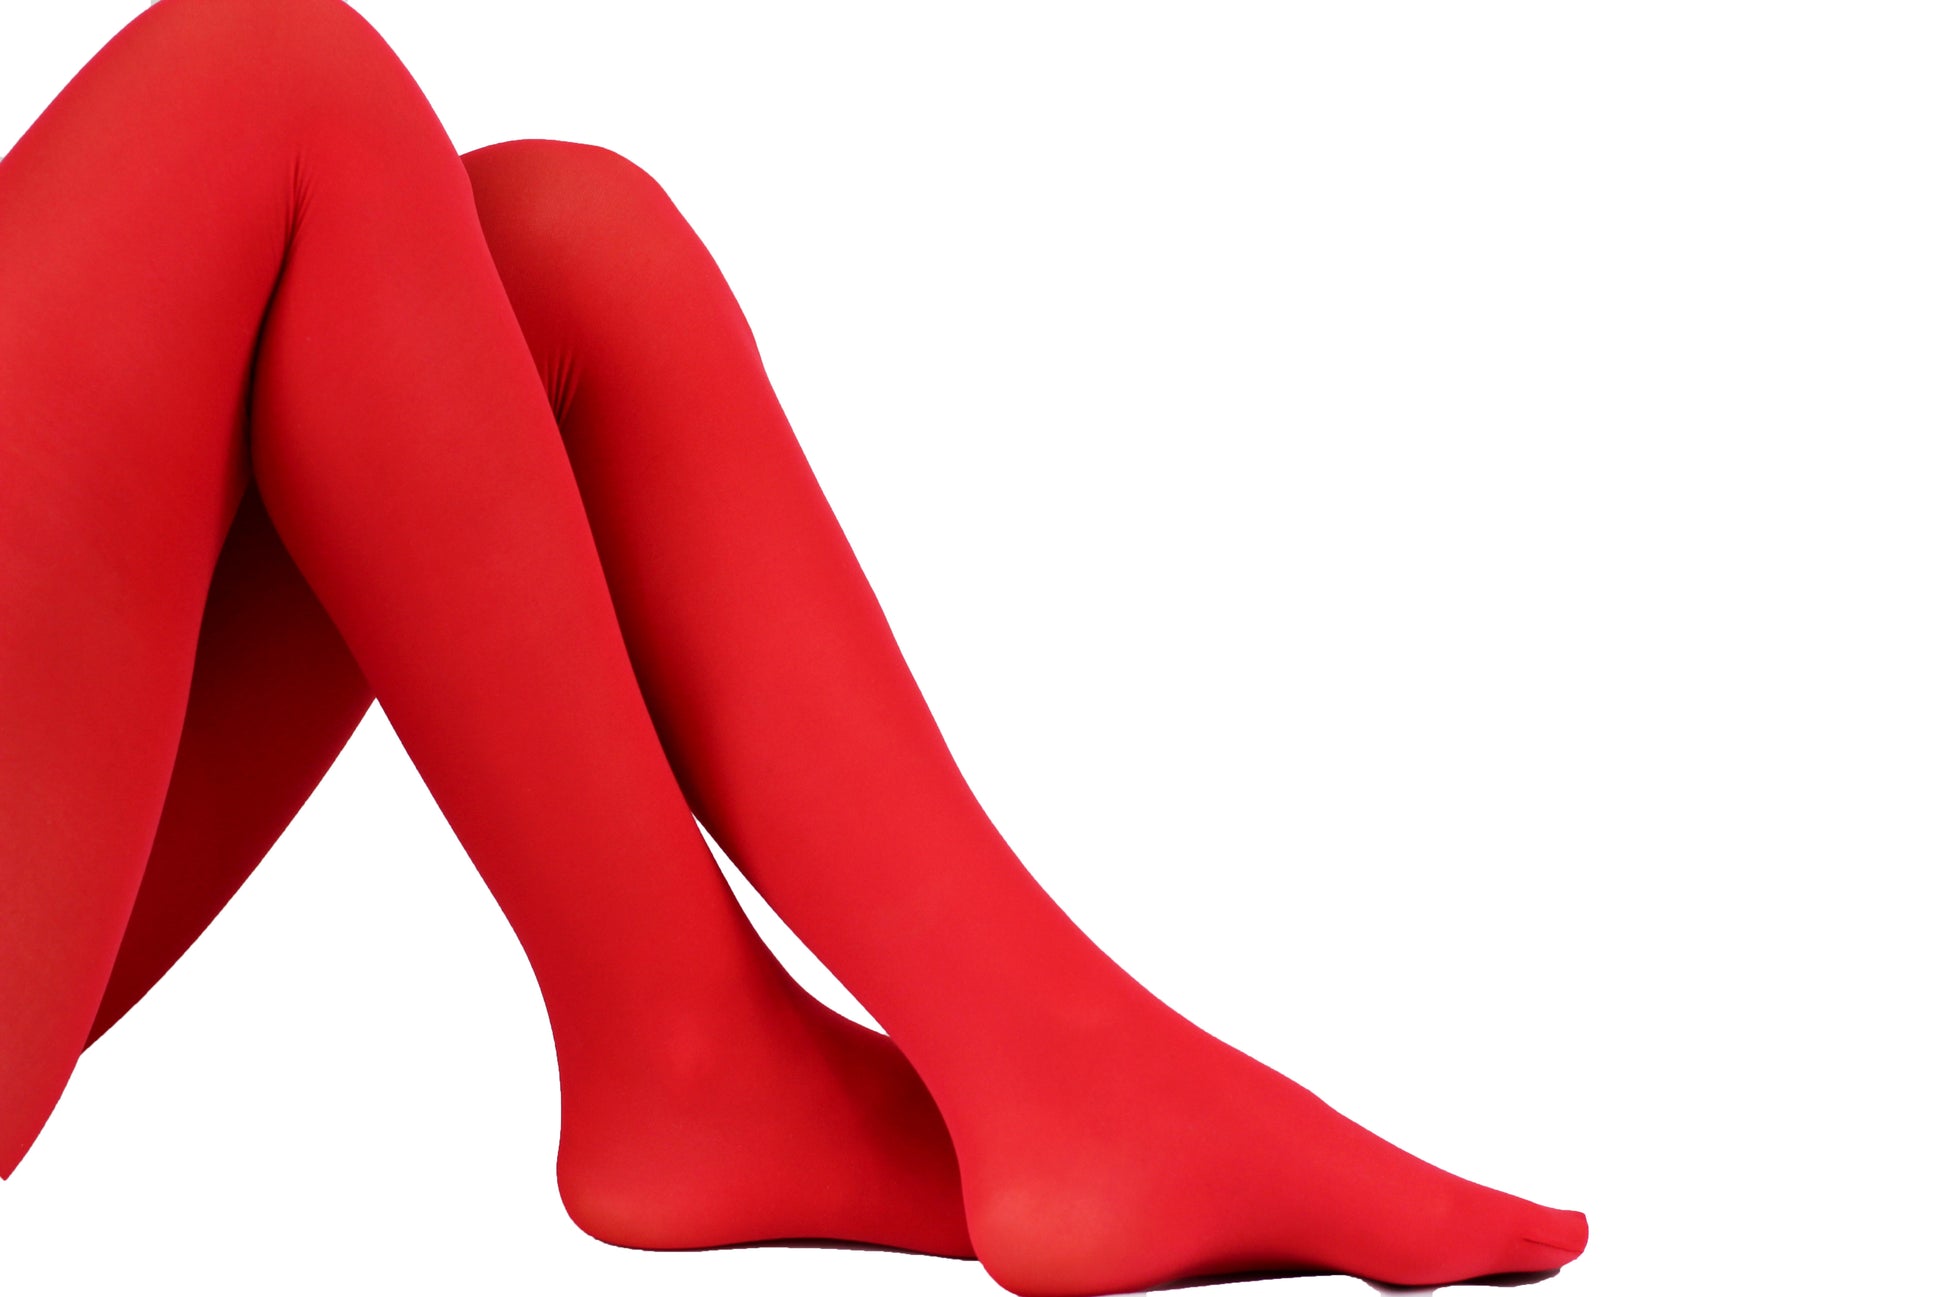 RED 40 Den. Bio-Degradable Tights with ALOE VERA – Four Twenty Two US